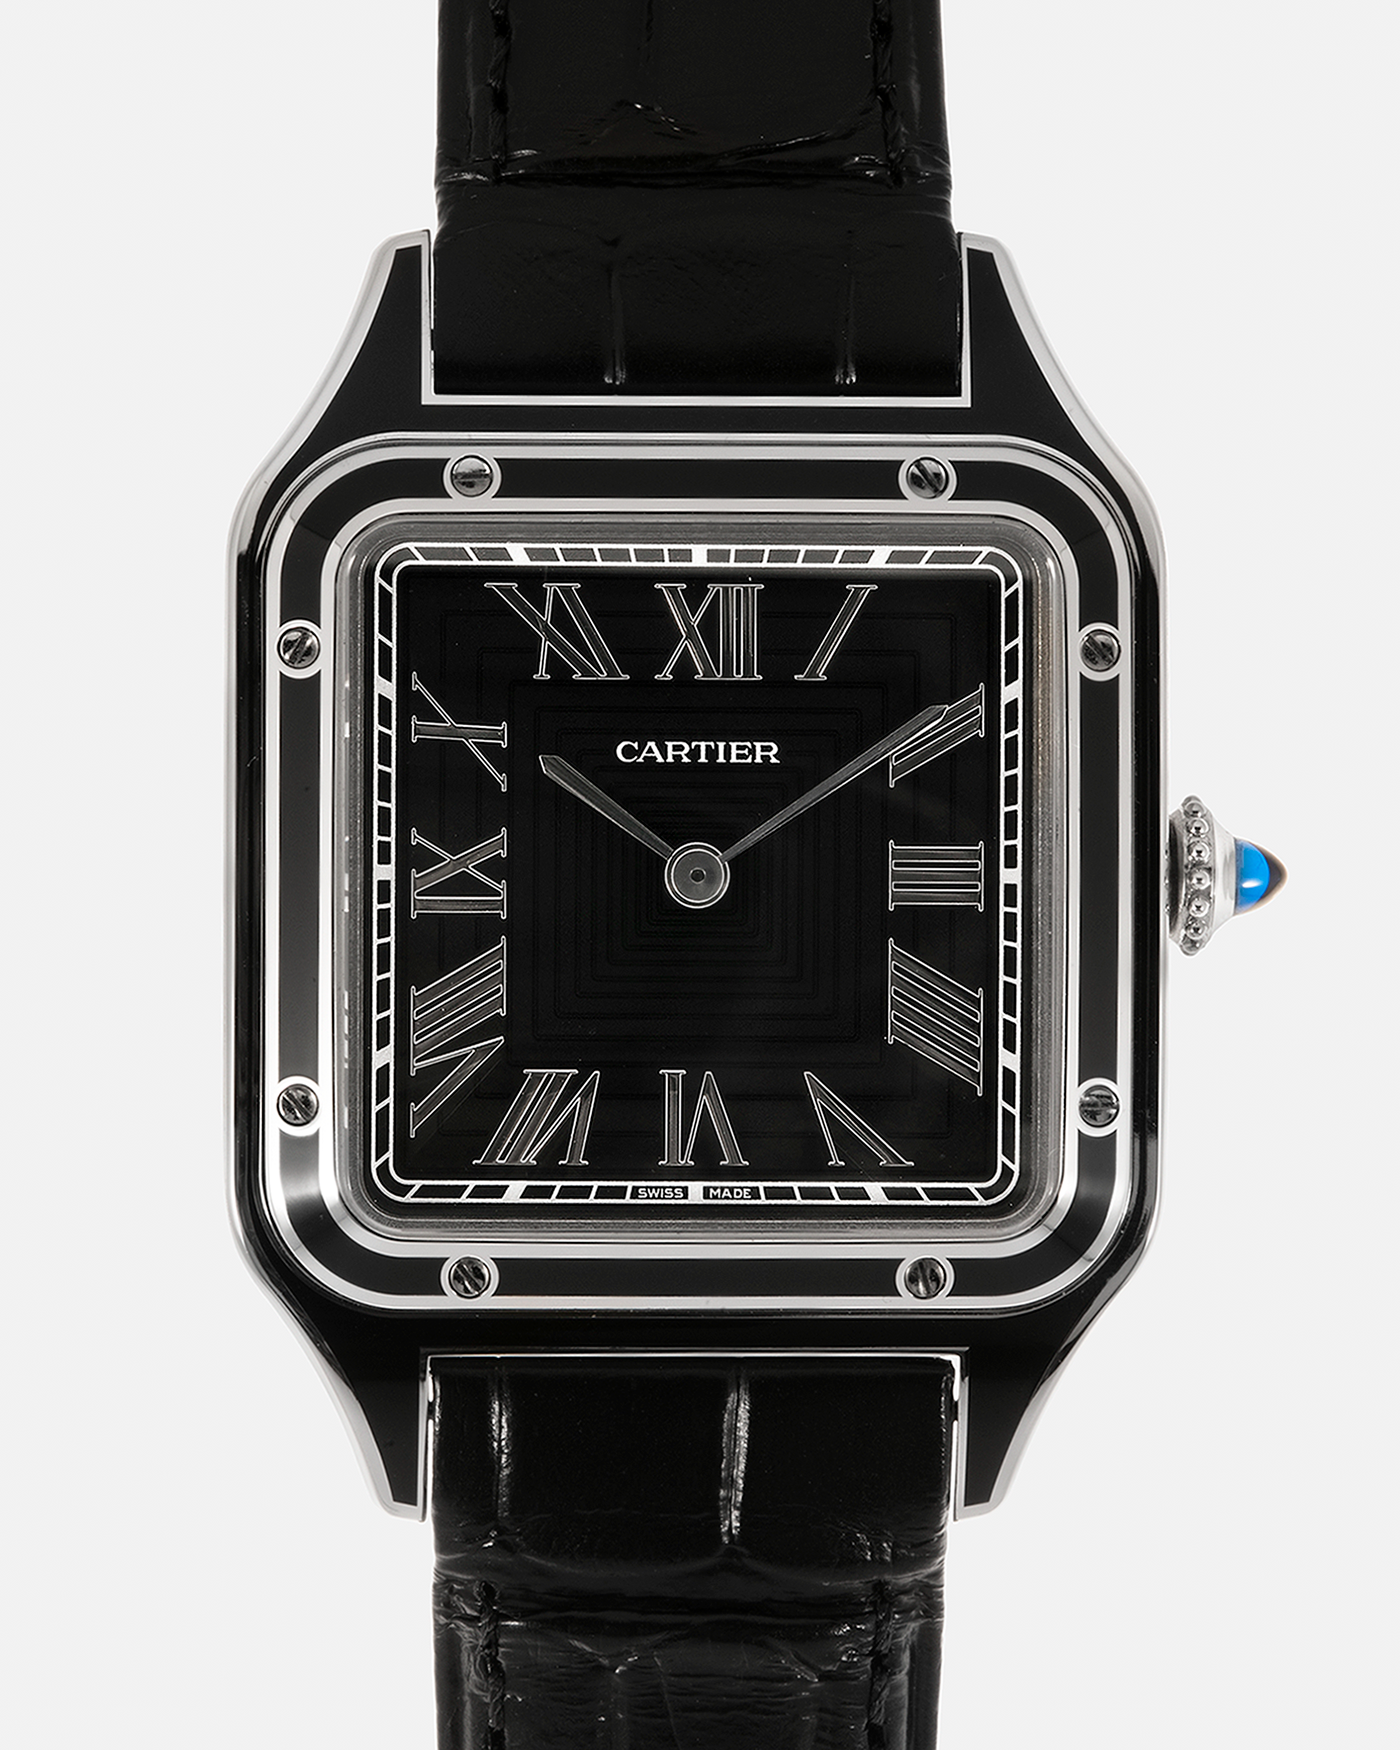 Brand: Cartier Year: 2023 Model: Santos-Dumont Large Reference: CRWSSA0046 Material: Stainless Steel, Black Lacquer Movement: Cartier Cal. 430 MC, Manual-Winding Case Diameter: 43.5mm x 31.4mm Strap: Cartier Black Alligator Leather Strap with Signed Stainless Steel Tang Buckle, Additional Generic Black Leather Strap